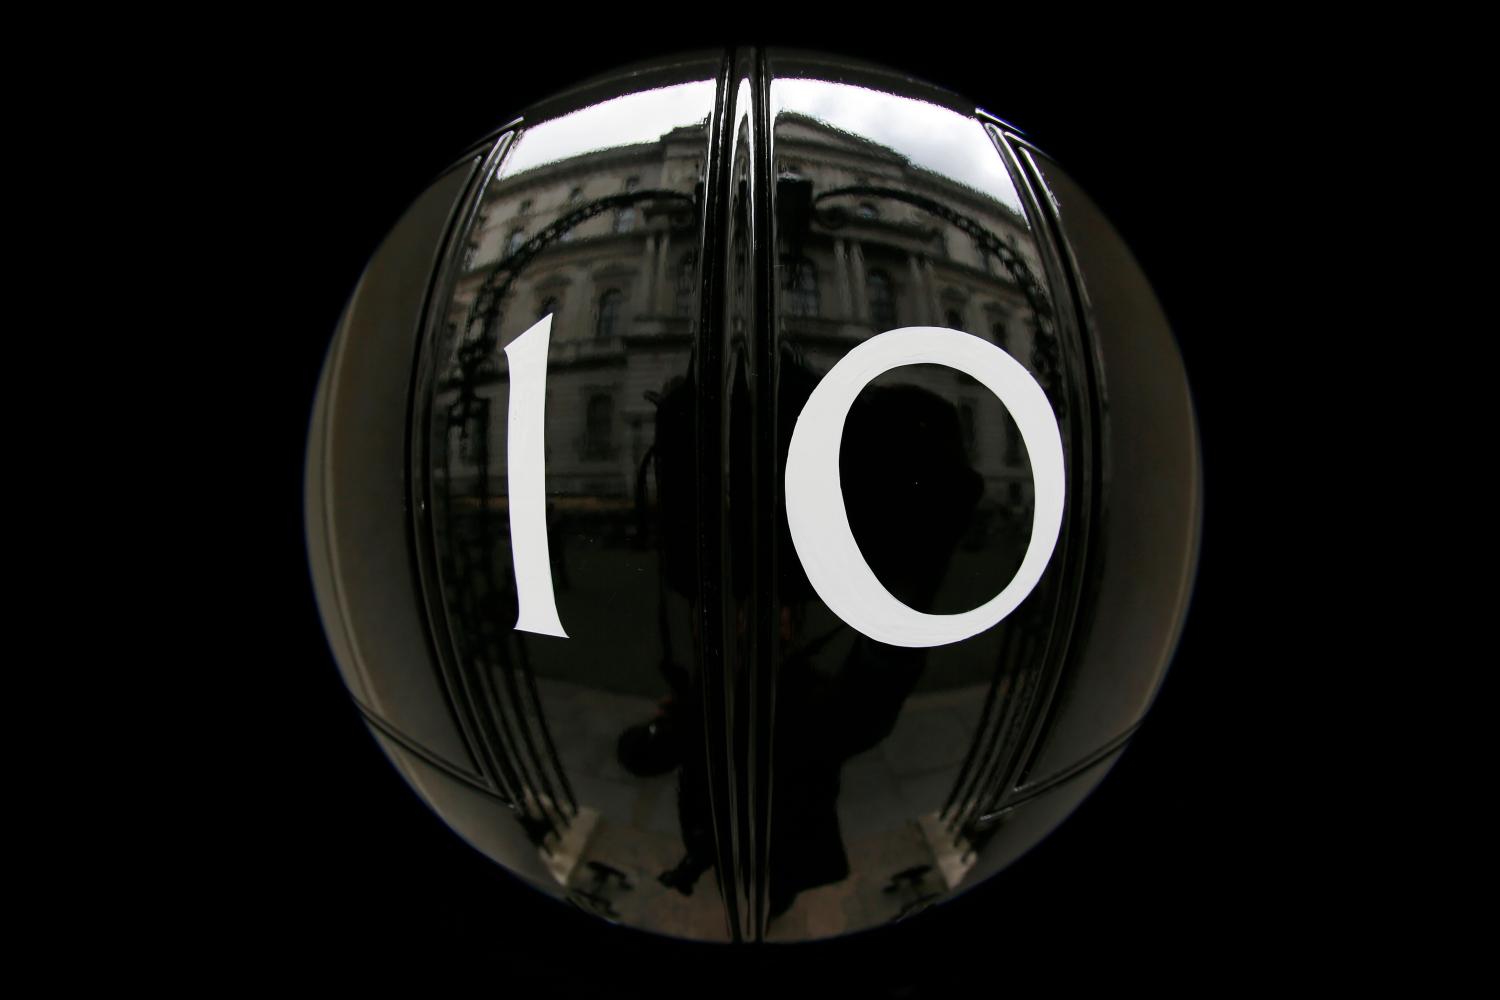 The door of number 10 Downing Street is seen in central London, Britain May 7, 2015. Picture taken with a fisheye lens. Britain goes to the polls today in a knife-edge national election to elect a new parliament and prime minsiter. REUTERS/Stefan Wermuth - LR2EB570P3HYC